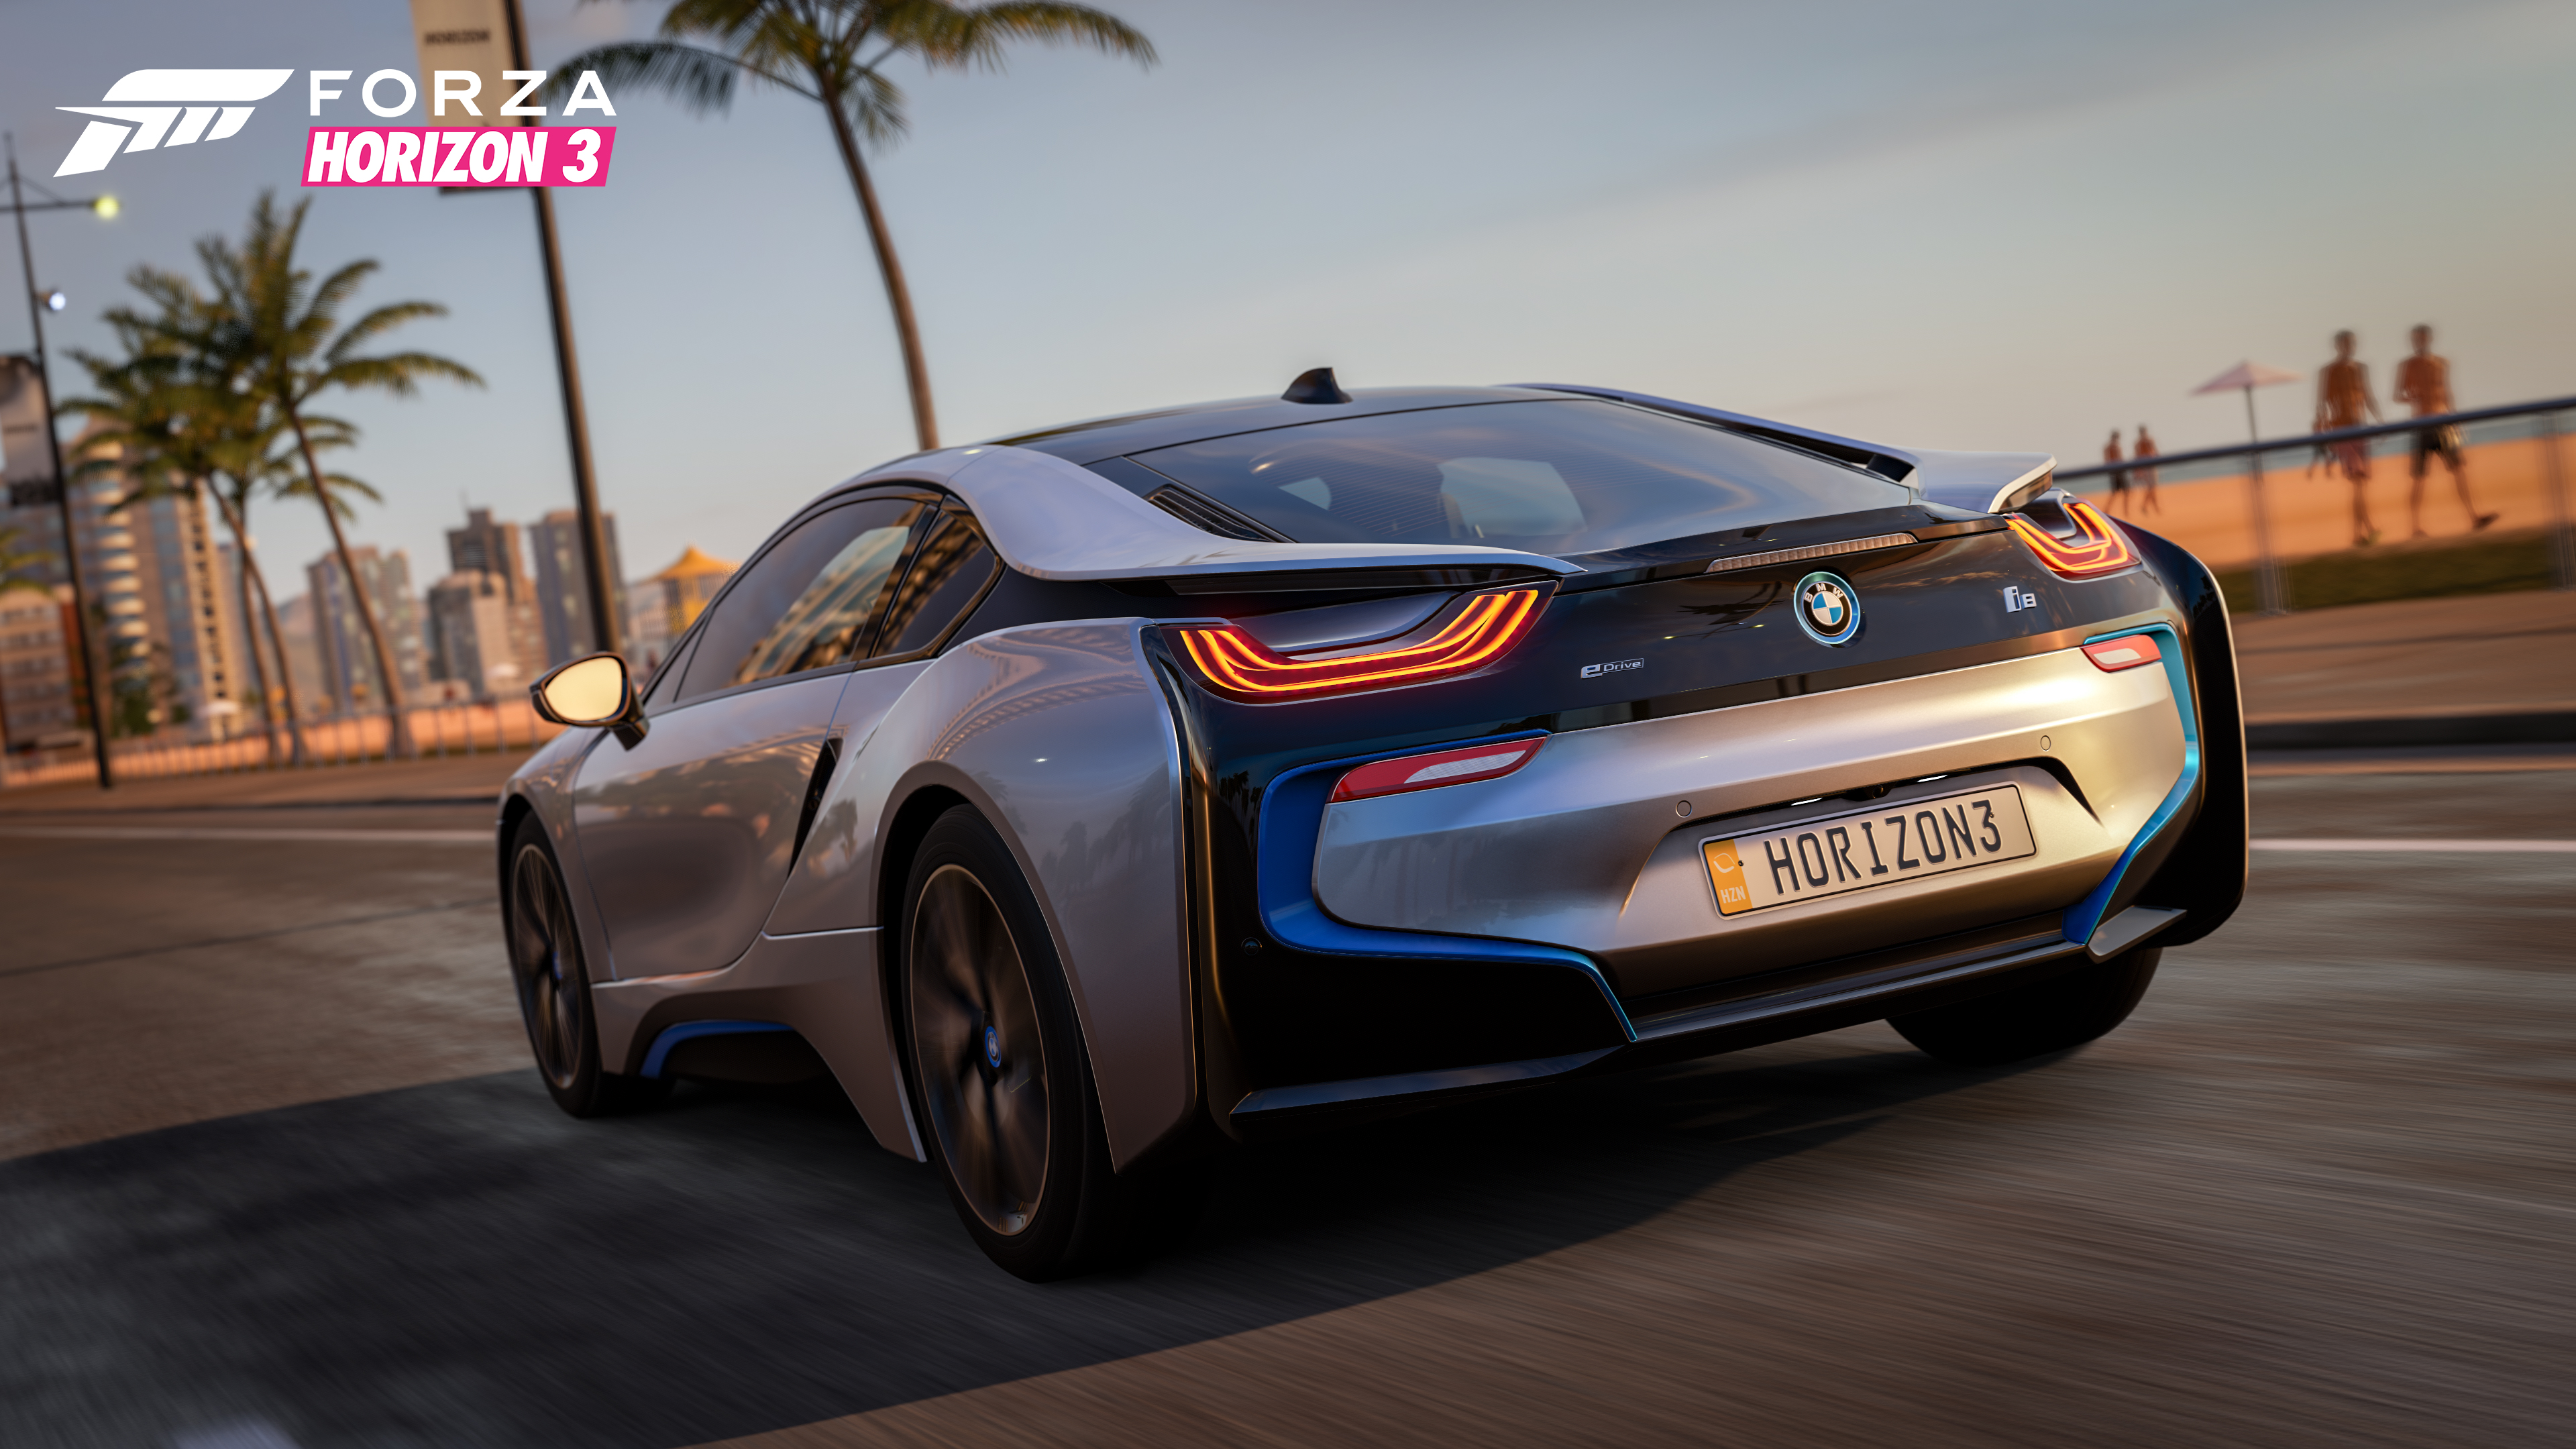 Ring in the New Year with the Forza Horizon 3 Rockstar Car Pack